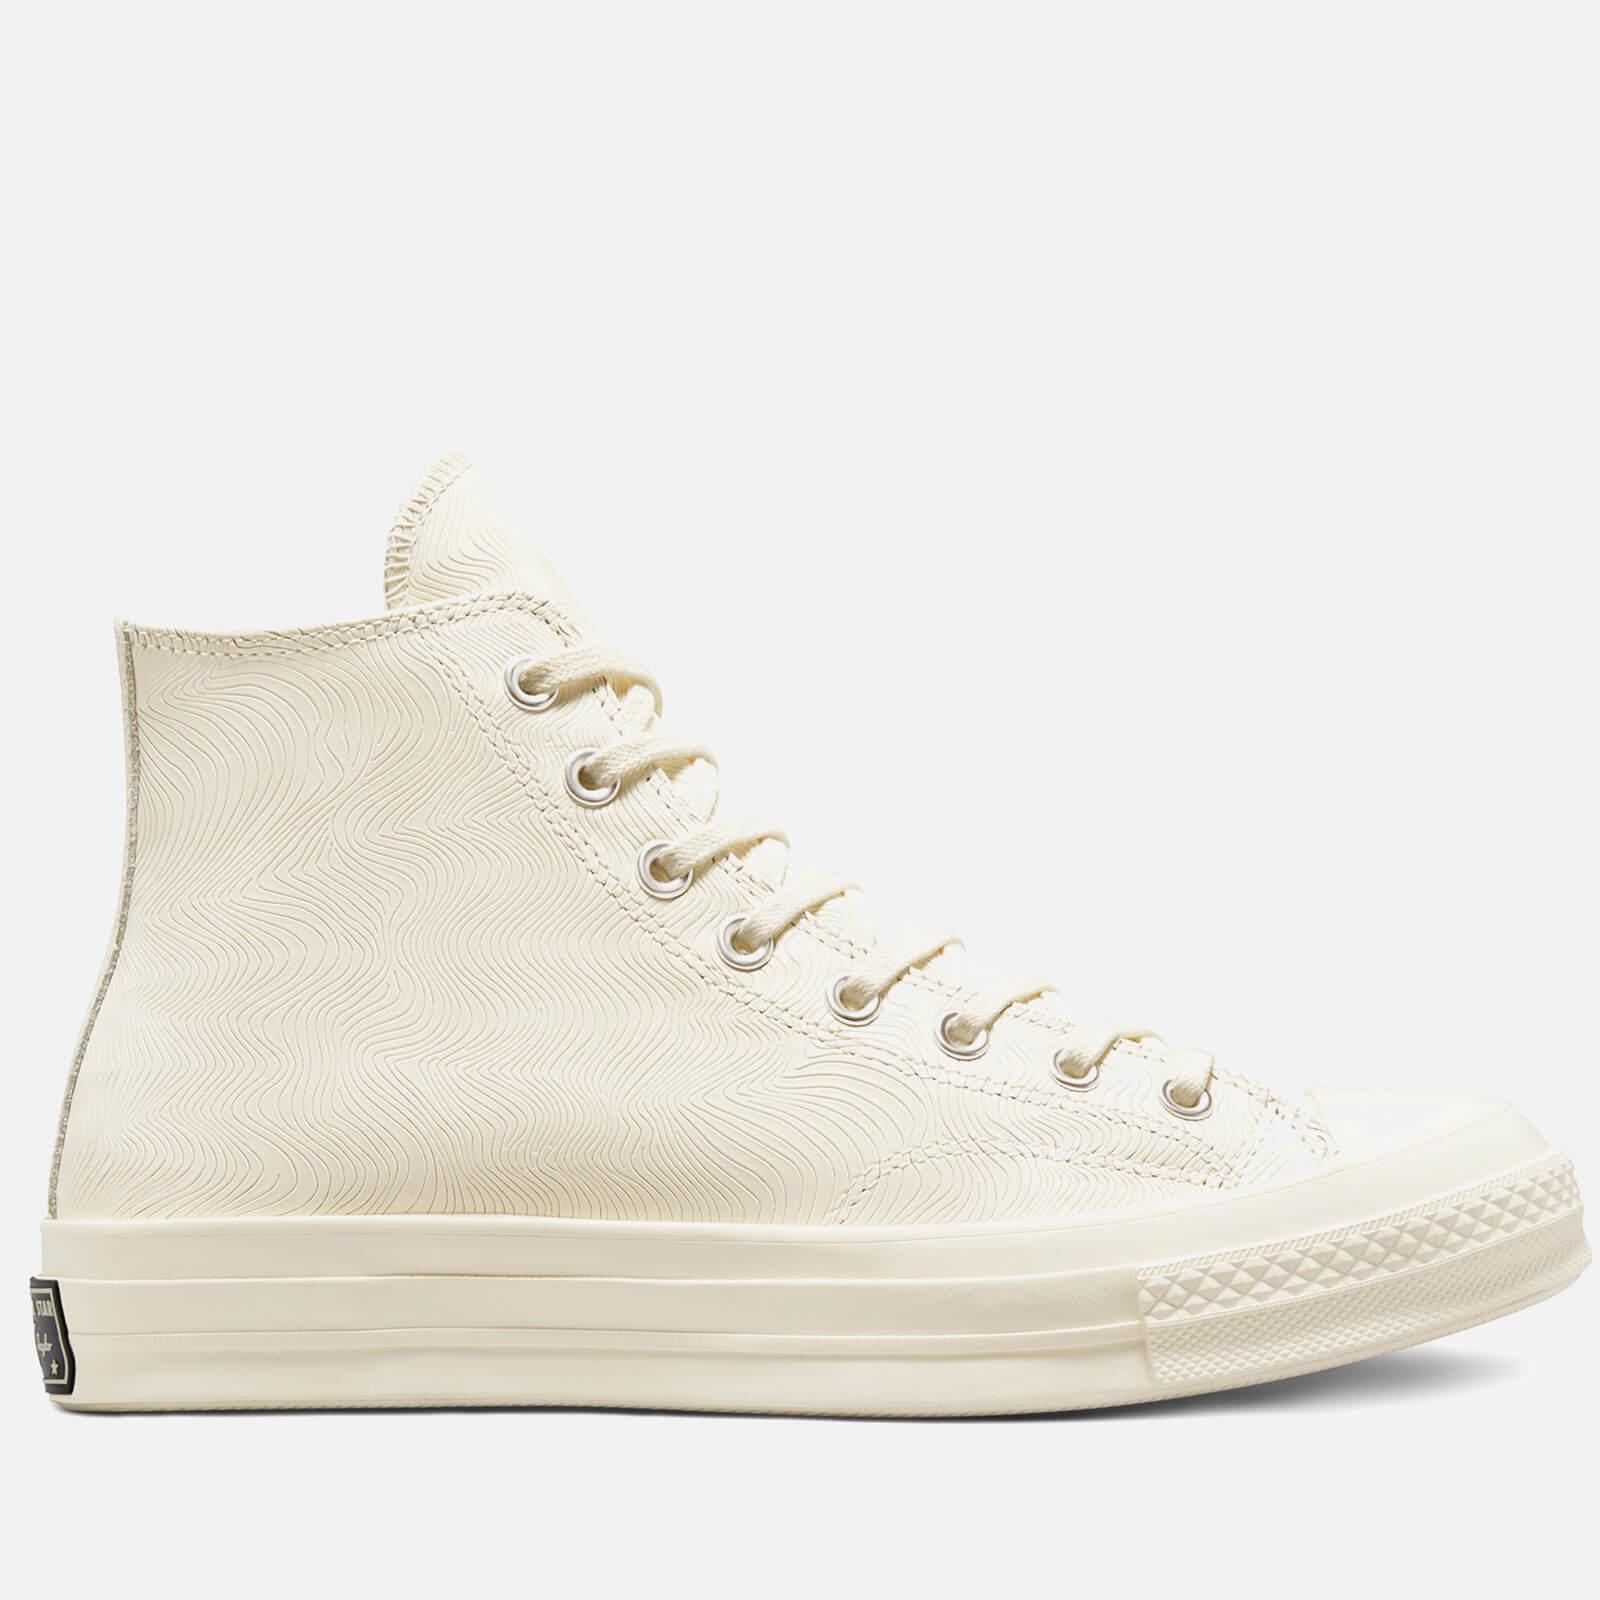 Converse Chuck 70 Seasonal Elevated Leather Hi-top Trainers in White | Lyst  Canada